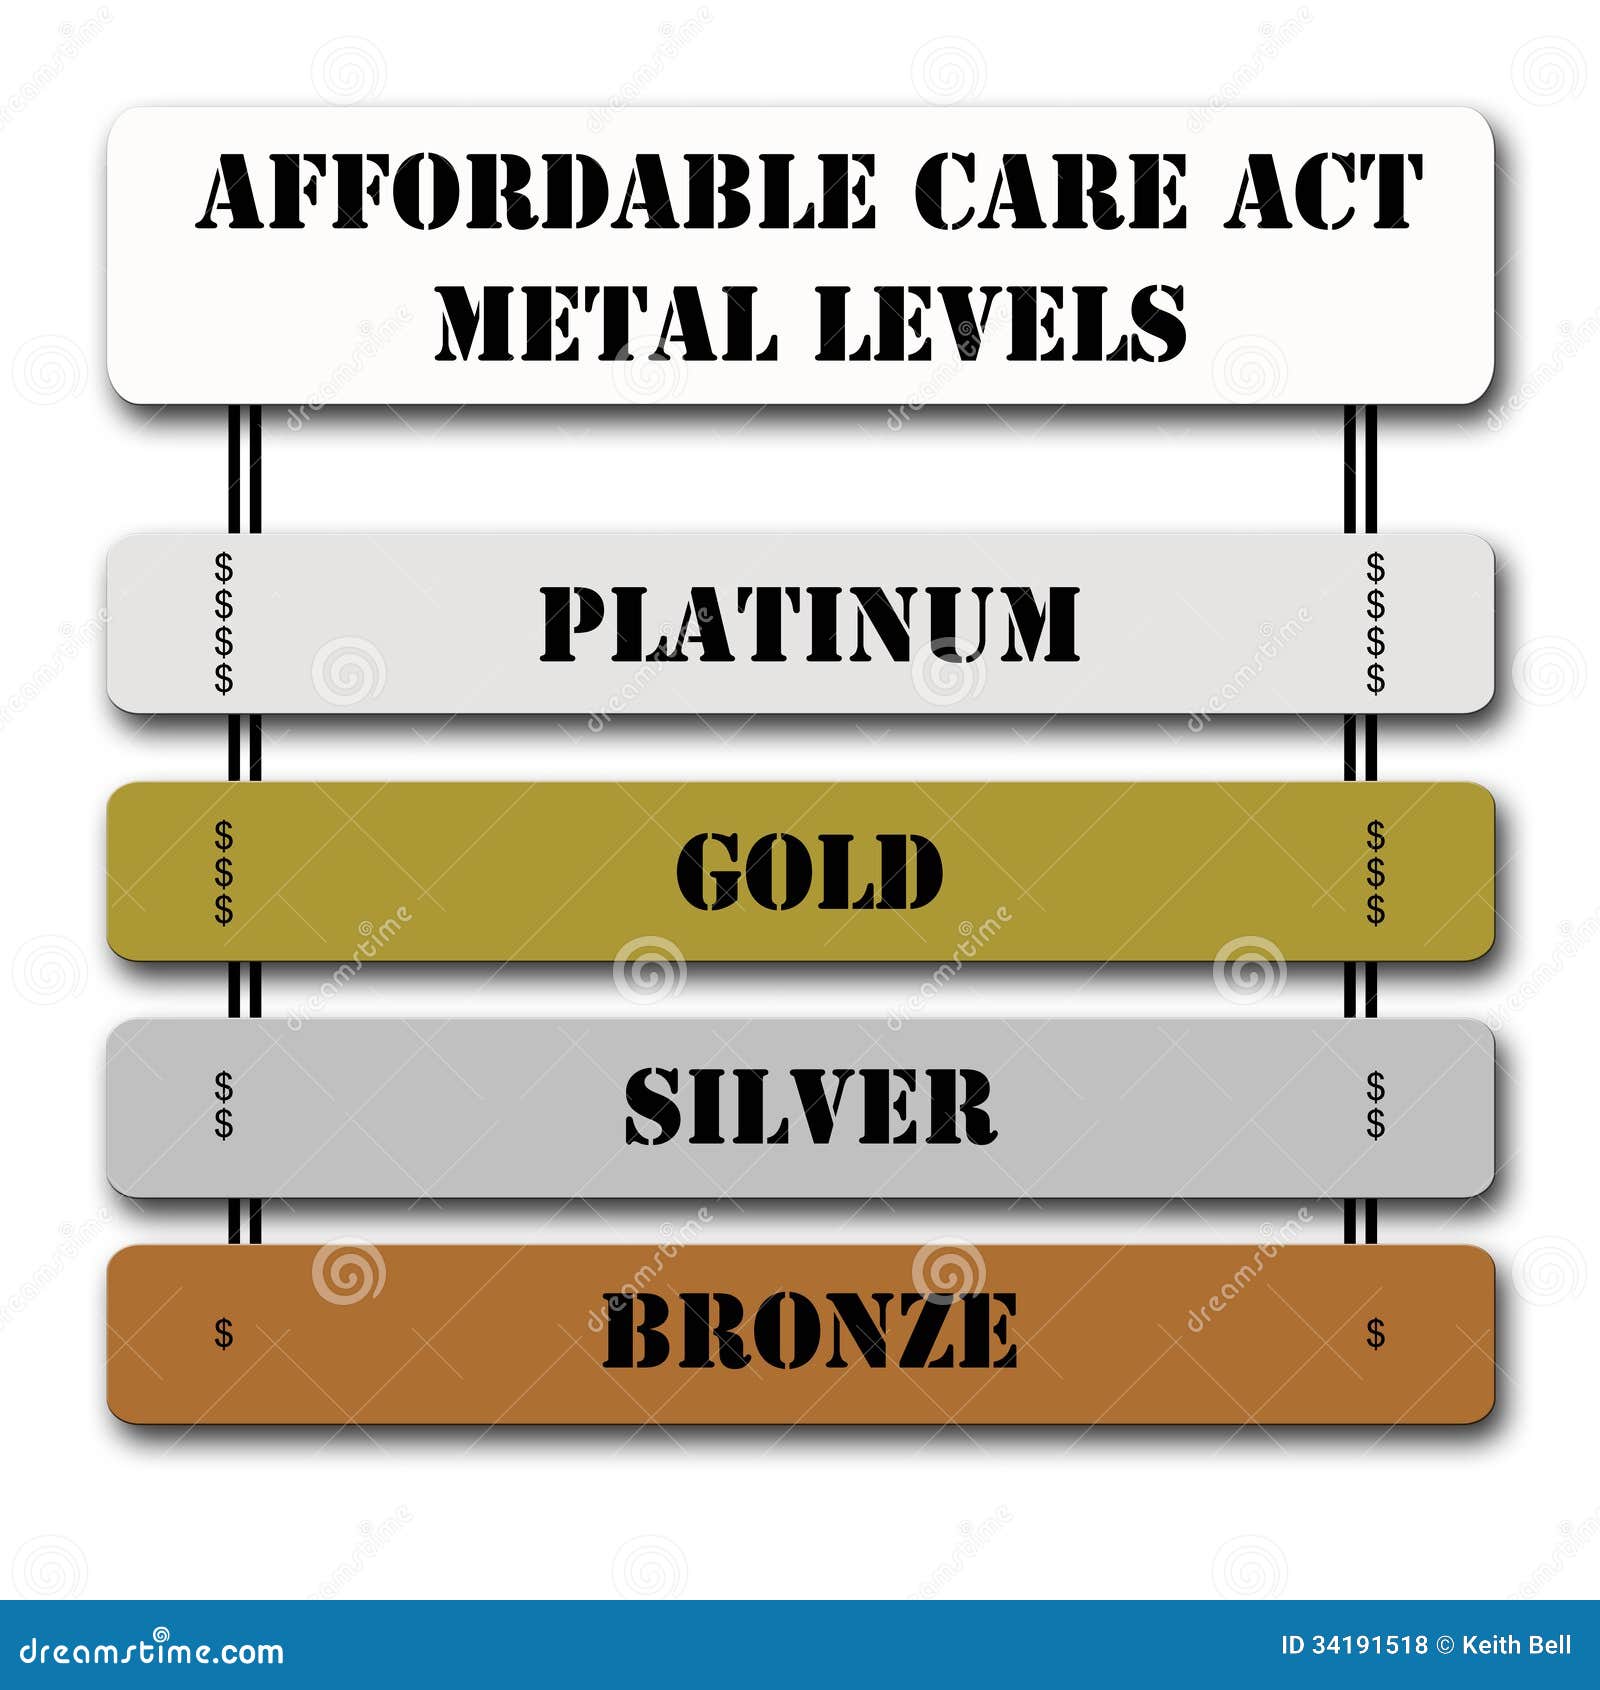 aca affordable care act metal levels